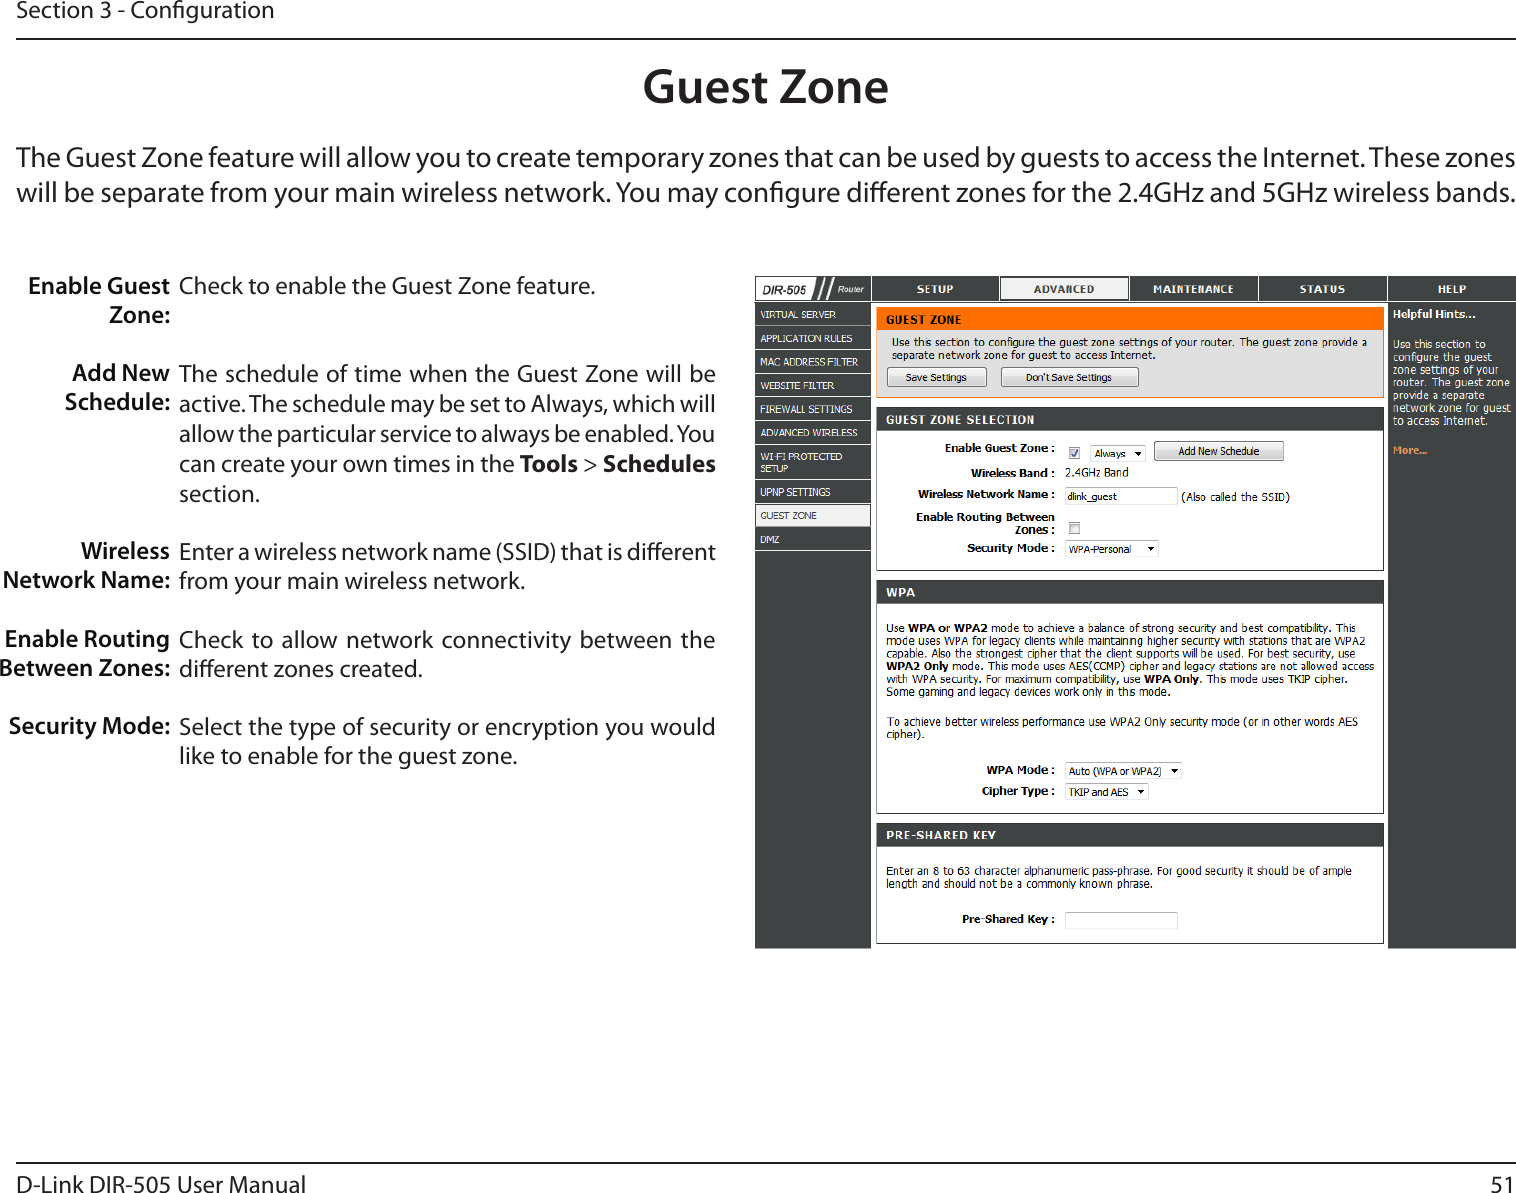 51D-Link DIR-505 User ManualSection 3 - CongurationGuest ZoneCheck to enable the Guest Zone feature. The schedule of time when the Guest Zone will be active. The schedule may be set to Always, which will allow the particular service to always be enabled. You can create your own times in the Tools &gt; Schedules section.Enter a wireless network name (SSID) that is dierent from your main wireless network.Check to allow network connectivity  between the dierent zones created. Select the type of security or encryption you would like to enable for the guest zone.  Enable Guest Zone:Add New Schedule:Wireless Network Name:Enable Routing Between Zones:Security Mode:The Guest Zone feature will allow you to create temporary zones that can be used by guests to access the Internet. These zones will be separate from your main wireless network. You may congure dierent zones for the 2.4GHz and 5GHz wireless bands.